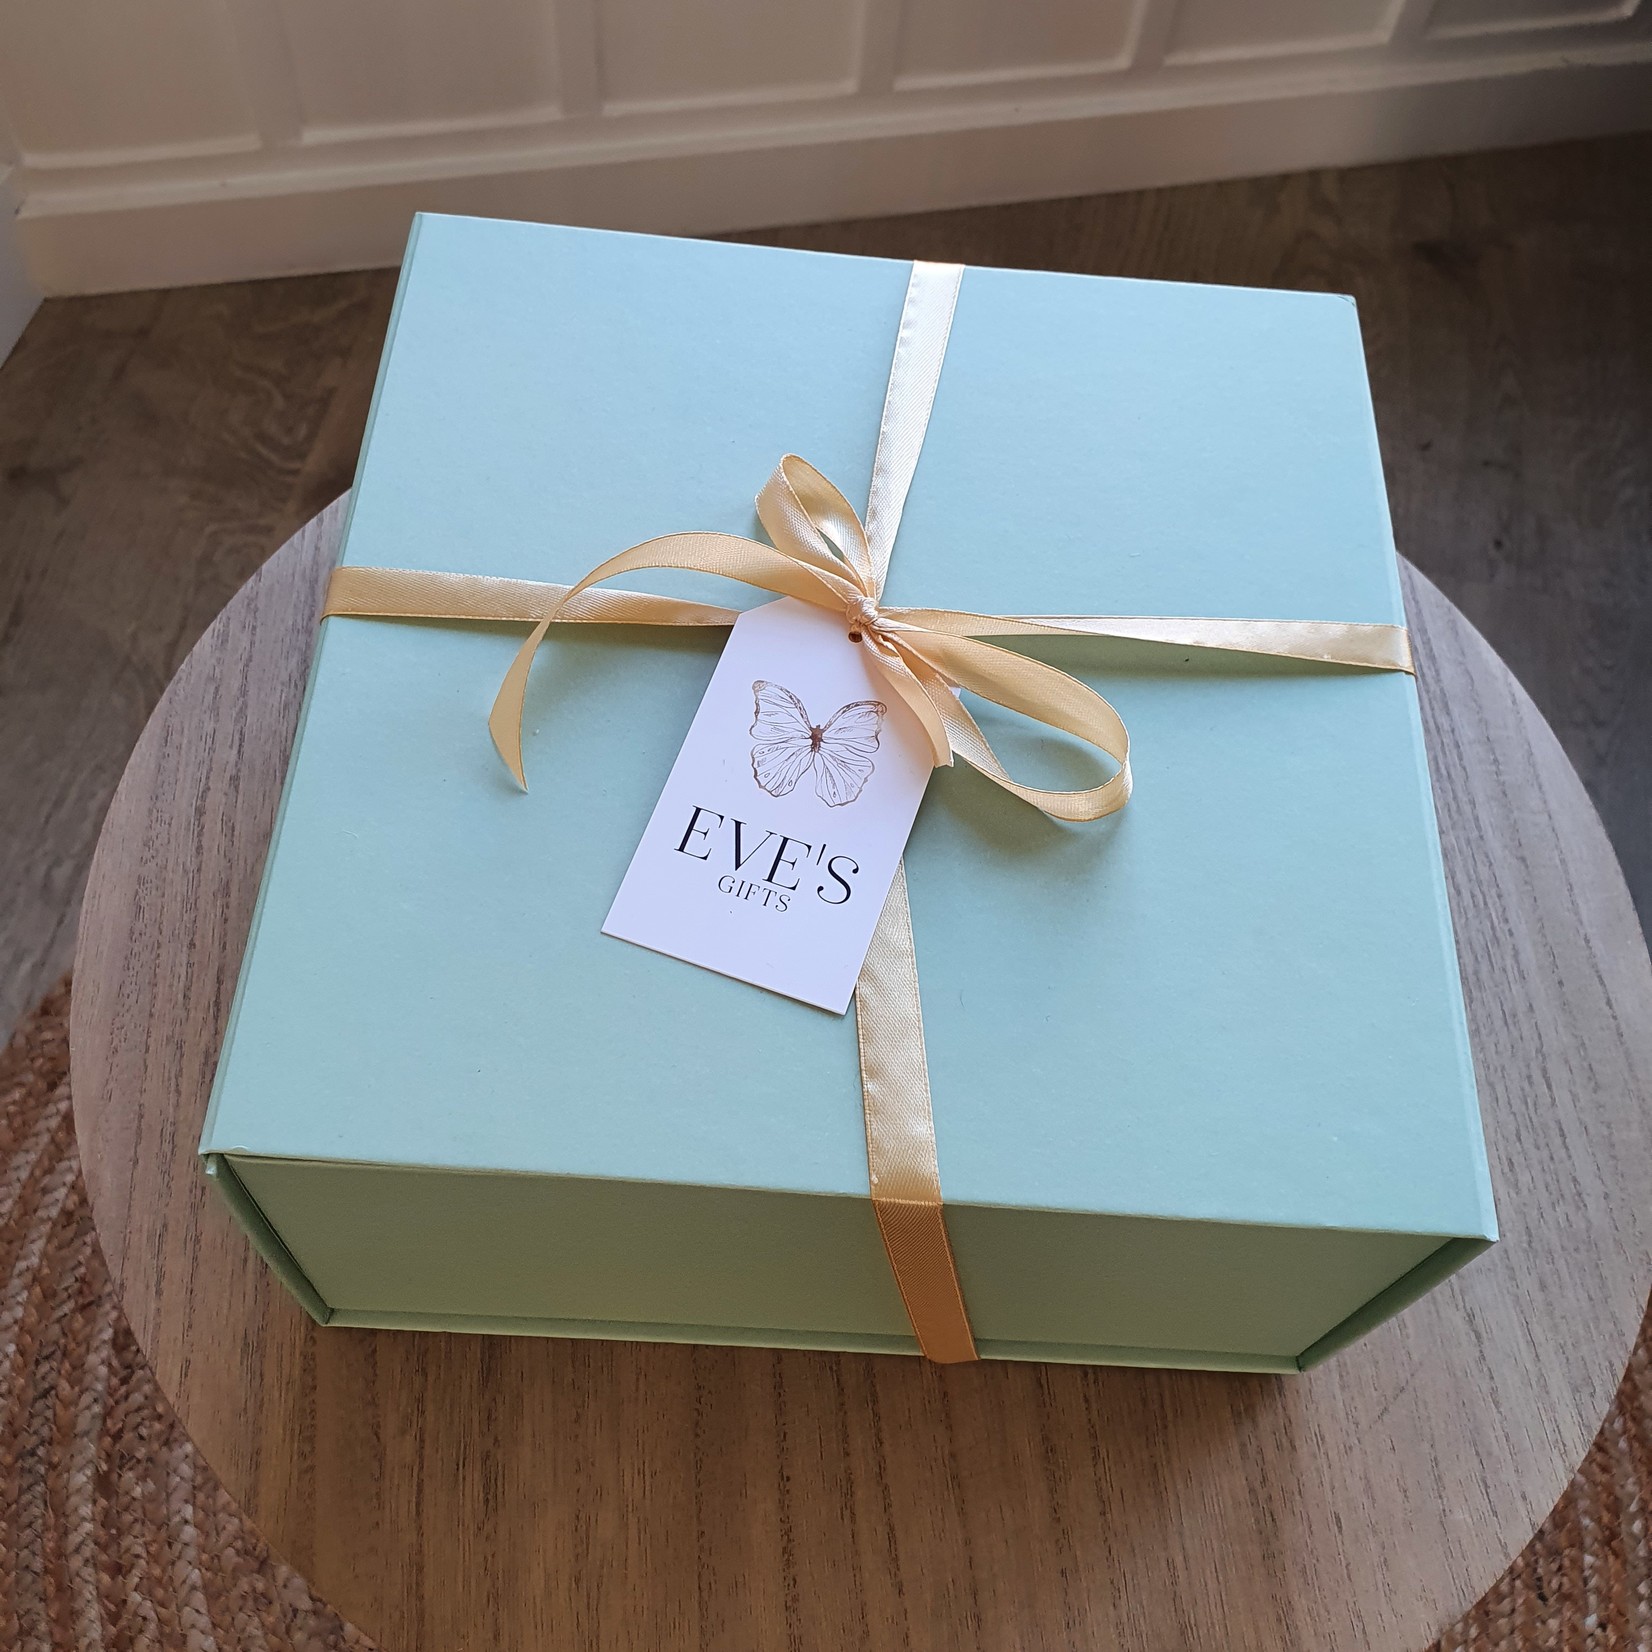 Eve's Gifts Mint Gift Box - Be your own sunshine